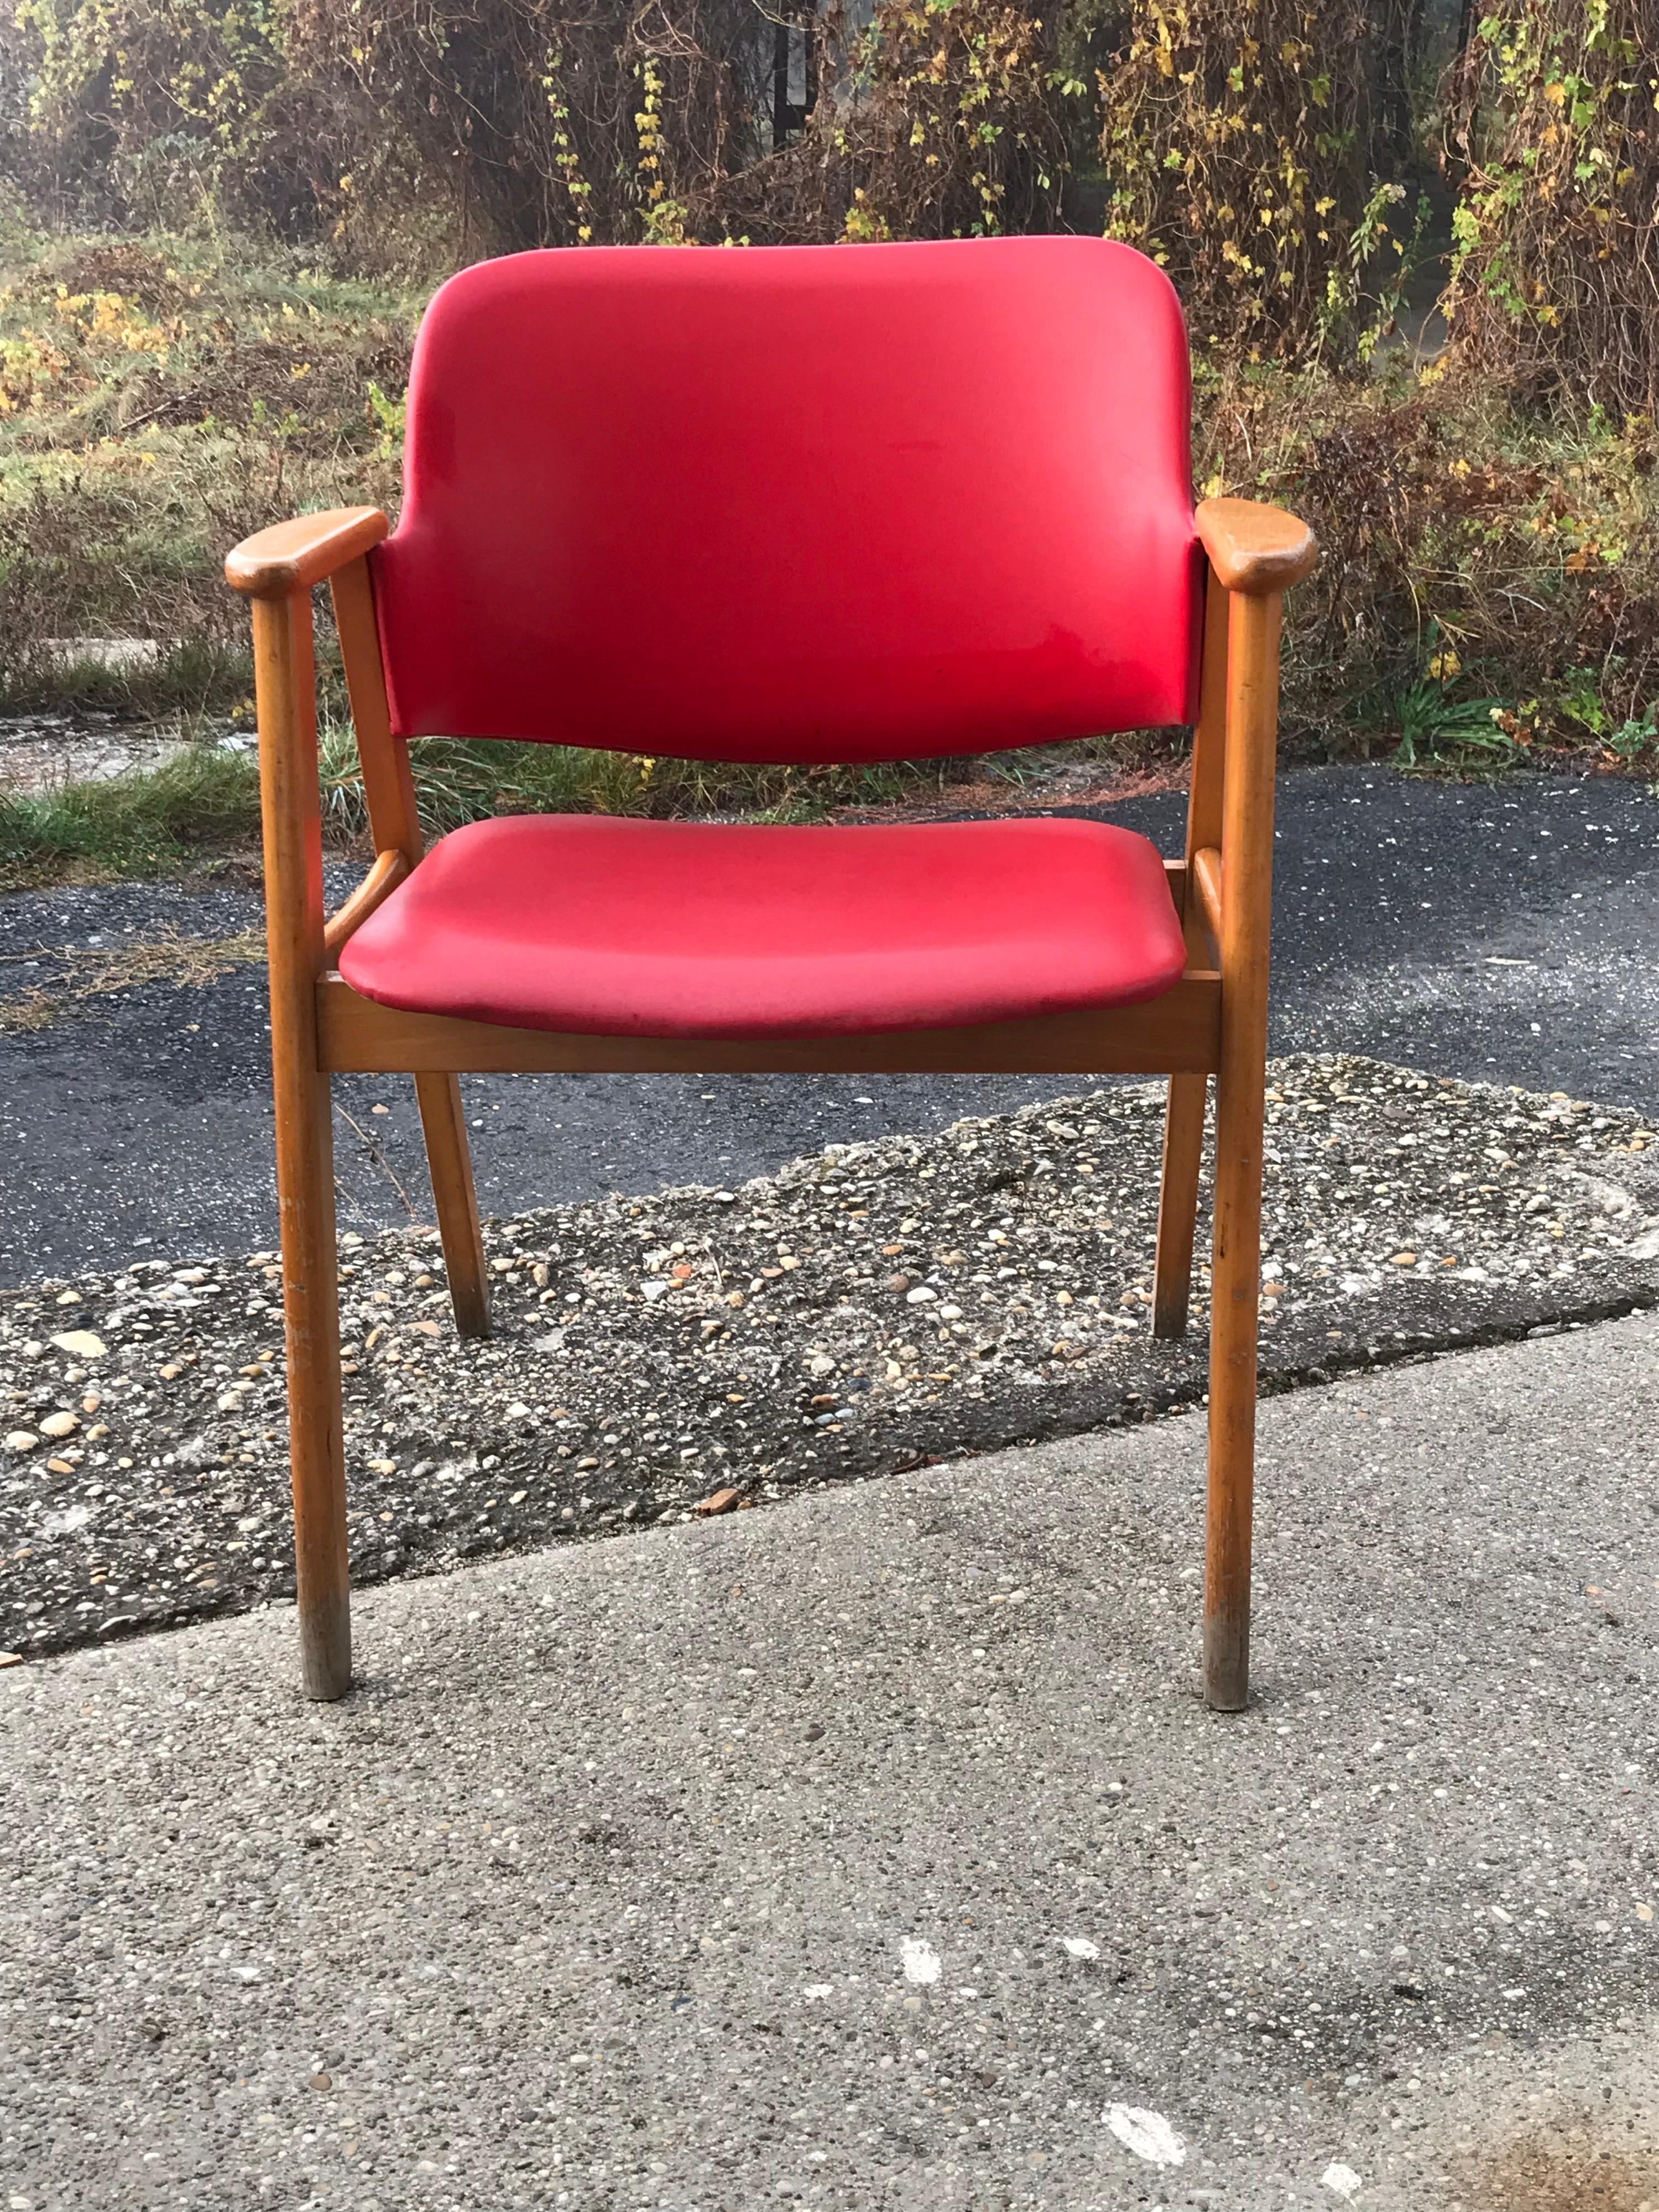 Midcentury Hungarian Chair with Red Faux Leather, circa 1960s For Sale 2